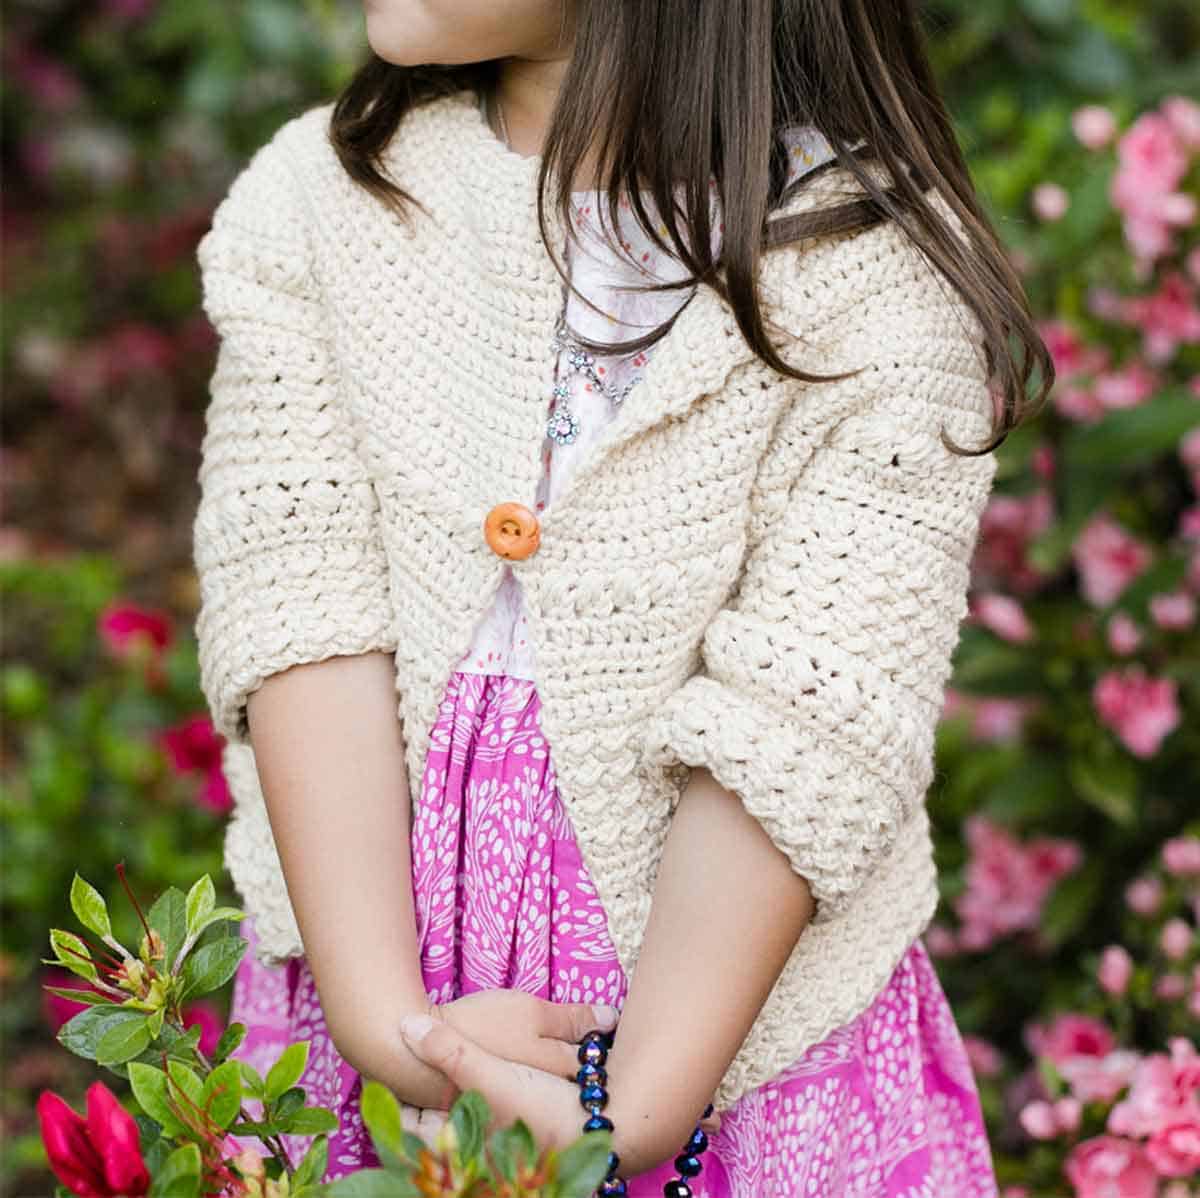 Image shows a little girl wearing crochet cardigan in front of a blurry background. Skip To My Lou